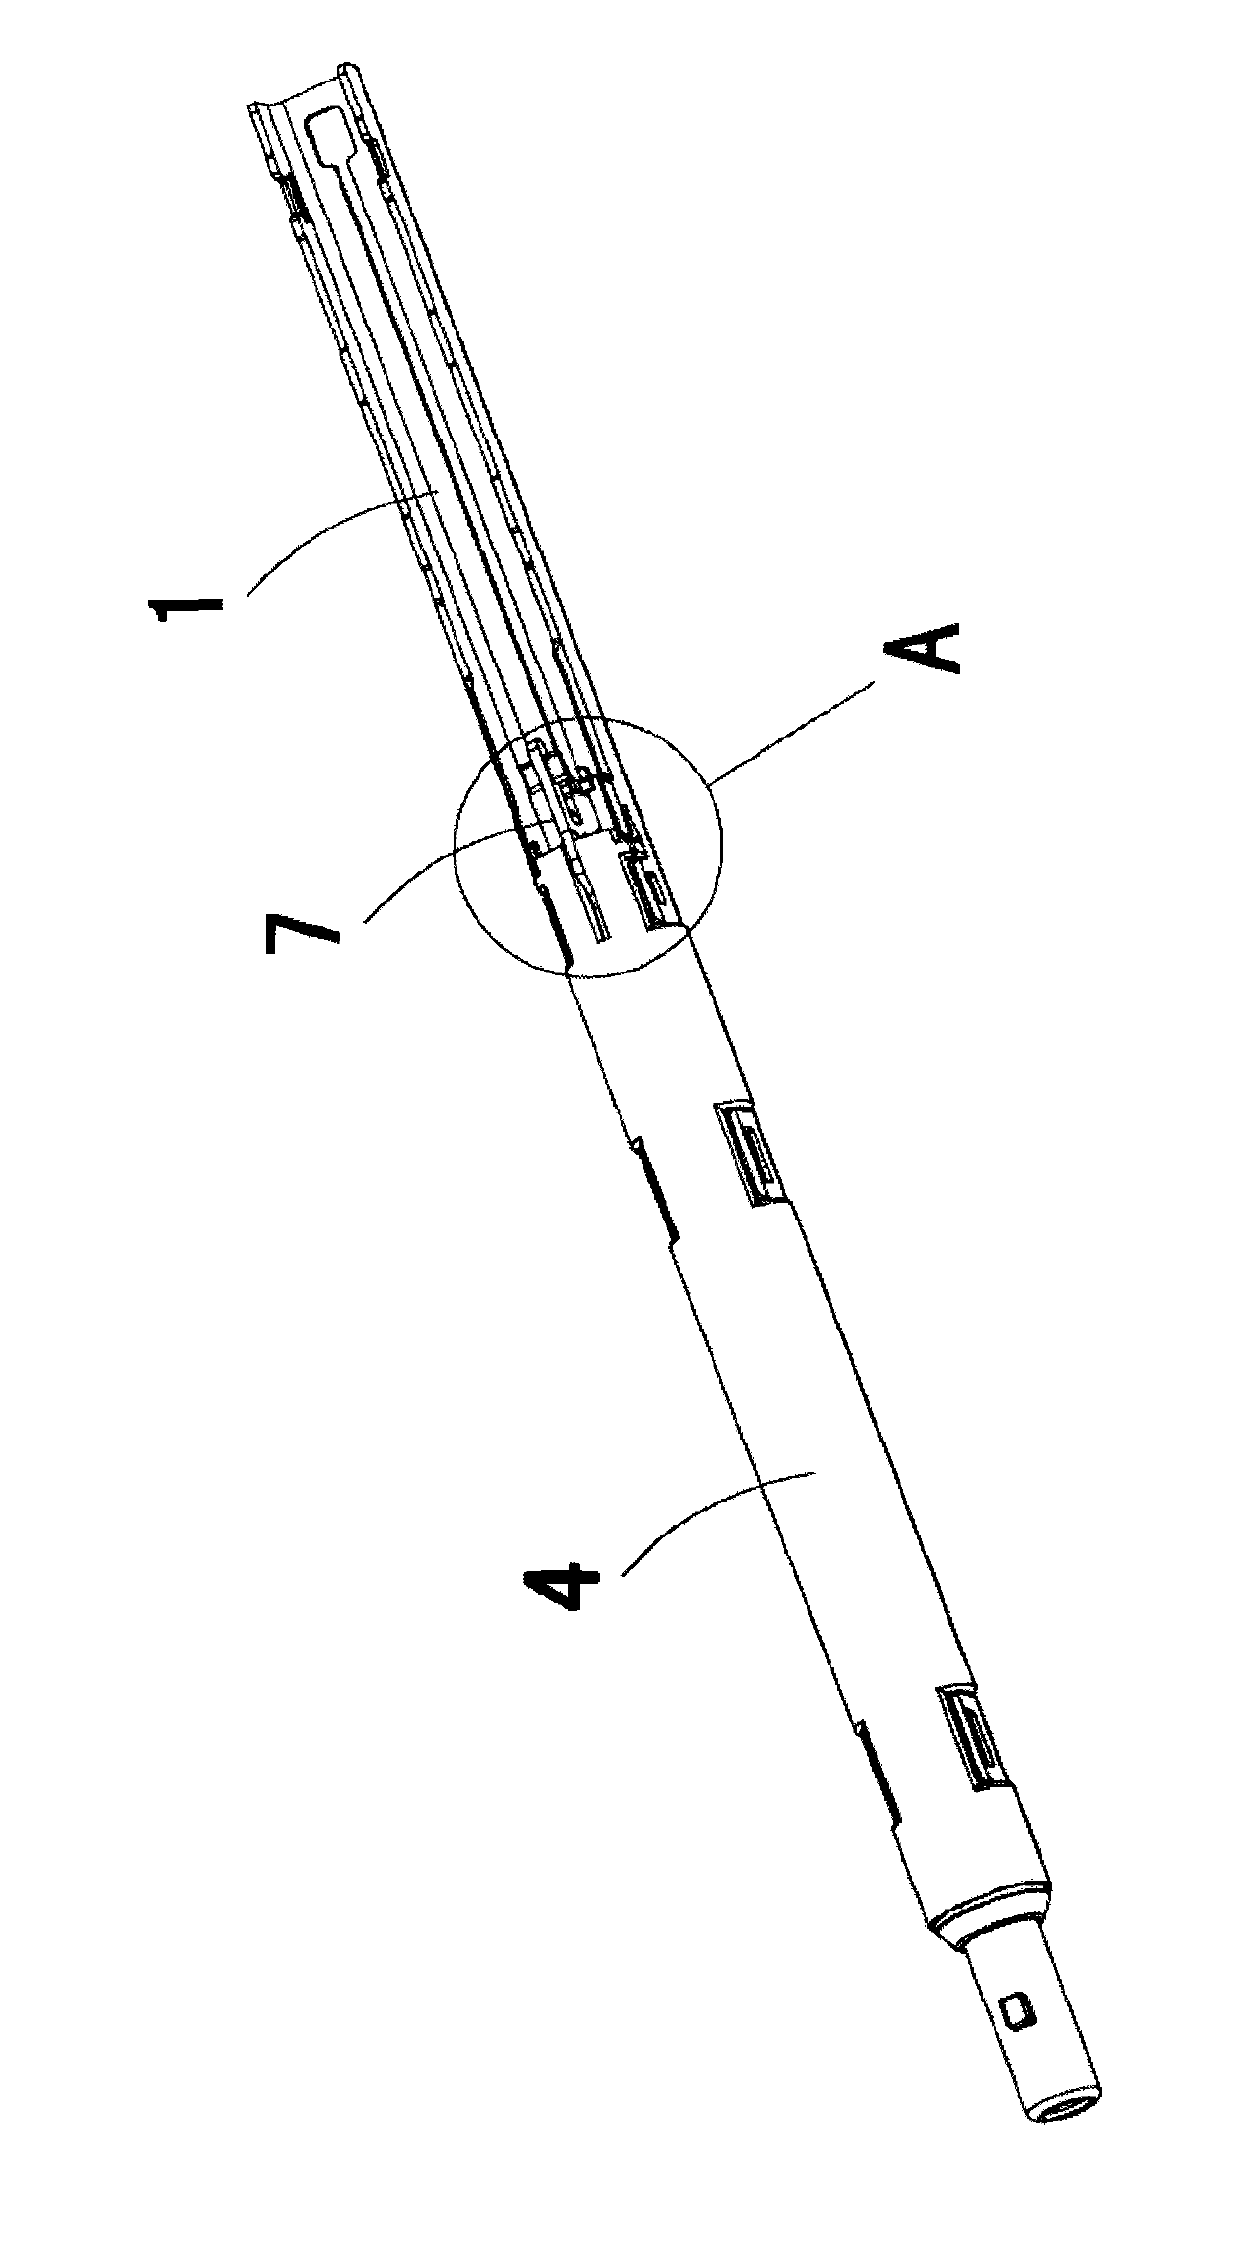 Linear suturing and excising device